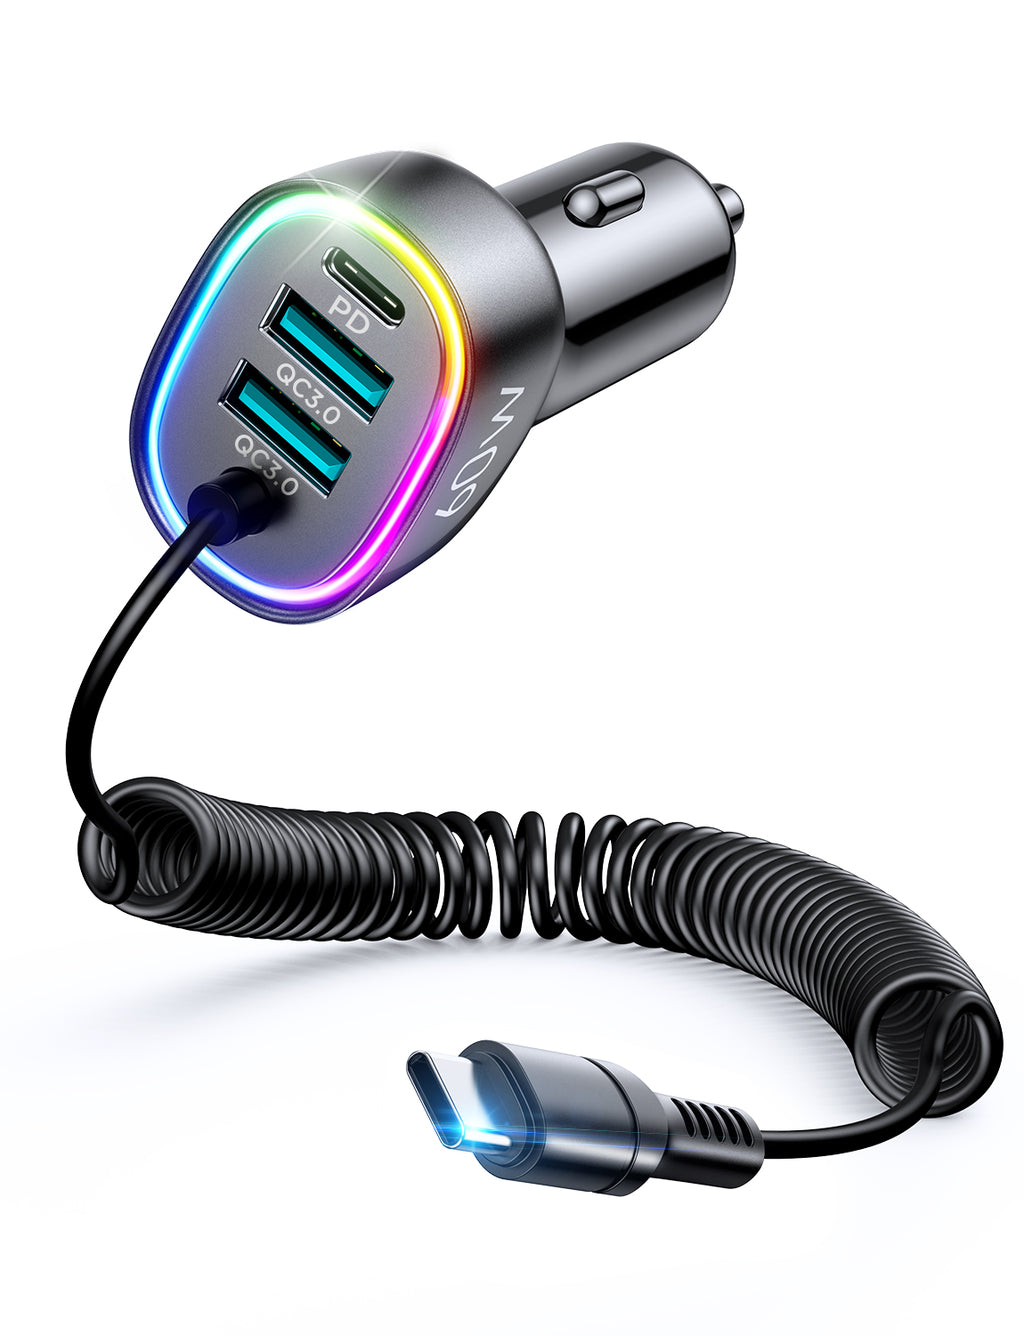 JR-CL07 60W 3-in-1 Wired Car Charger (Type-C)